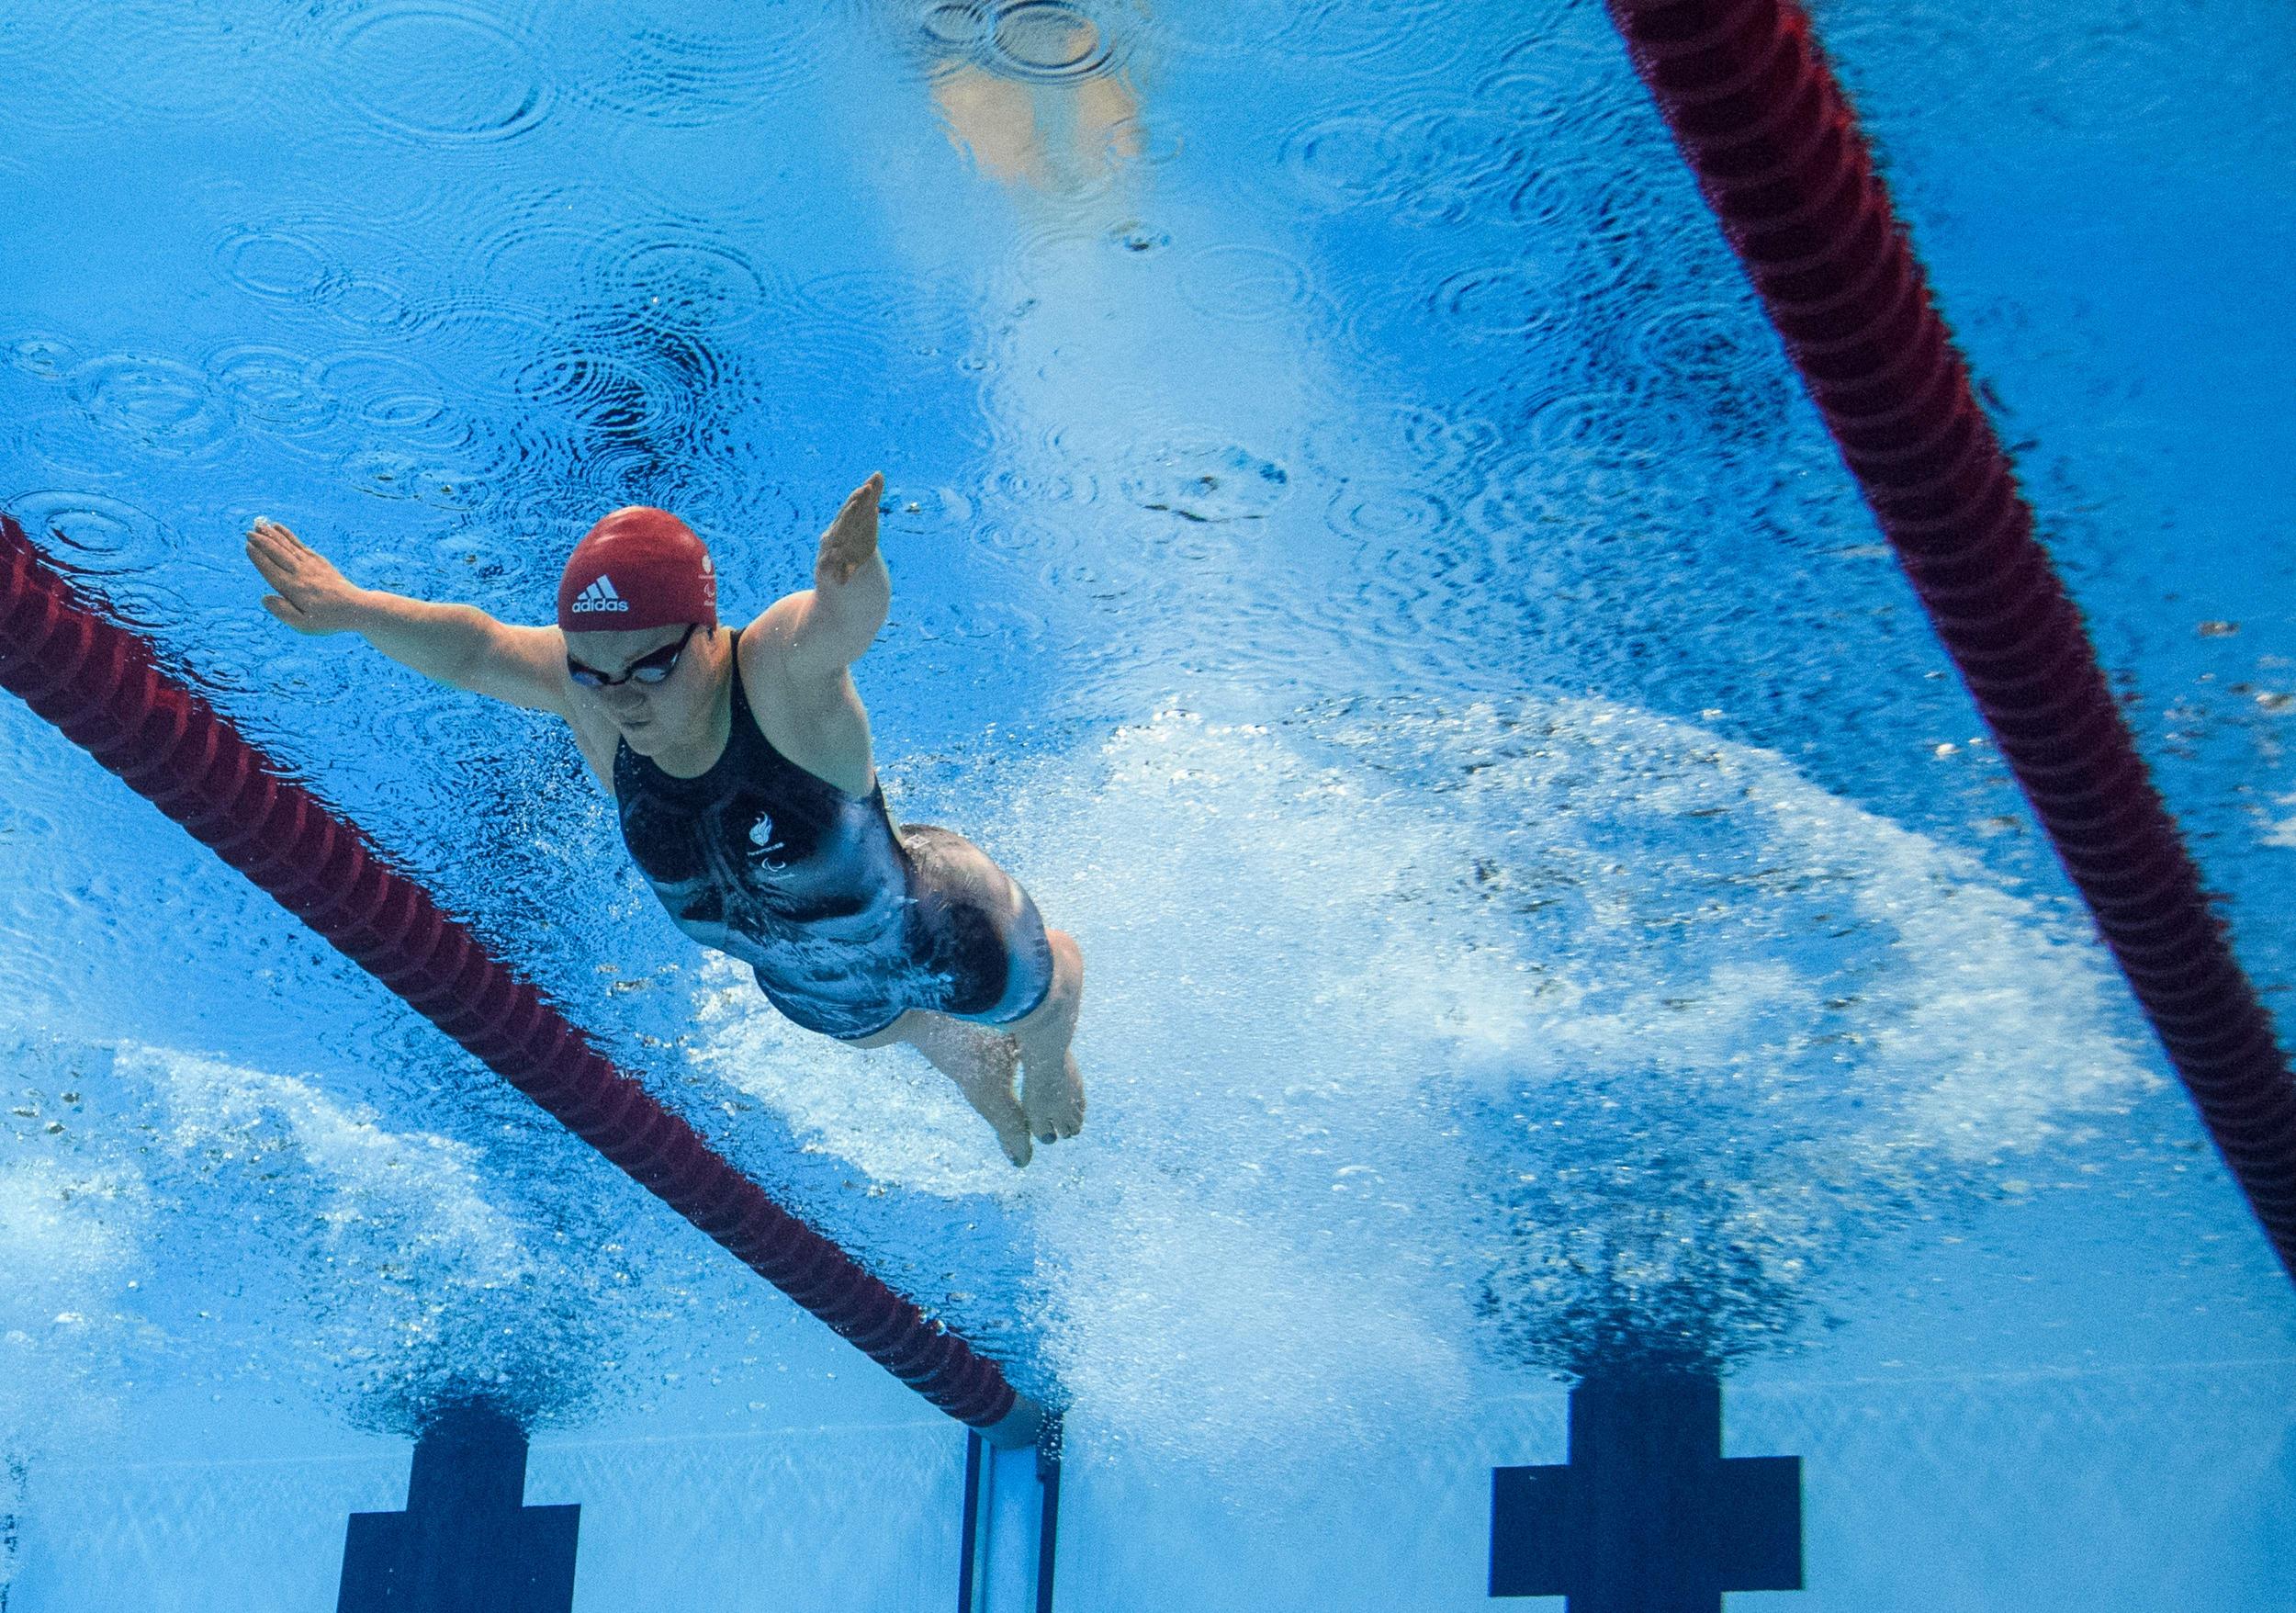 Simmonds in action during the Women's 100m Breaststroke SB6 Heats at Rio